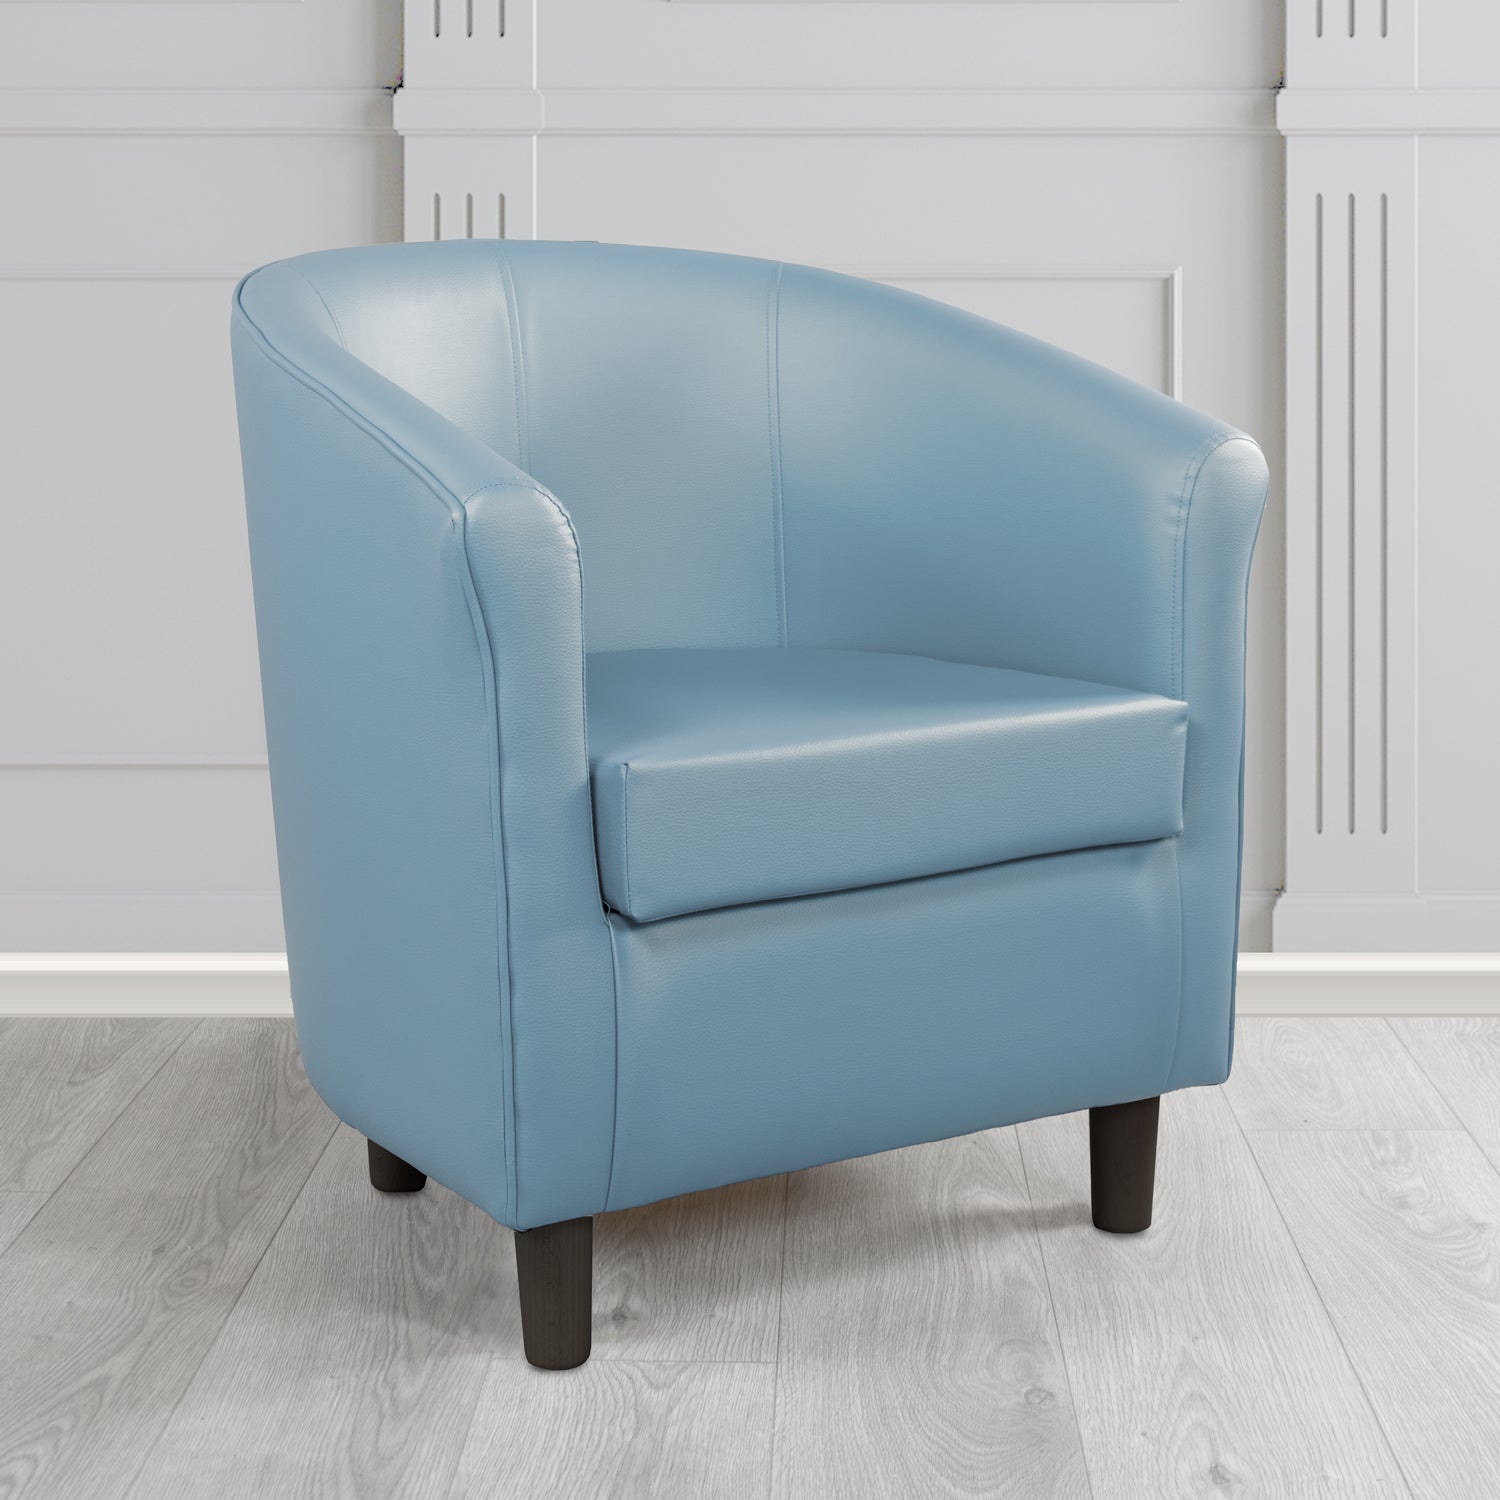 Tuscany Just Colour Cool Blue Antimicrobial Crib 5 Contract Faux Leather Tub Chair